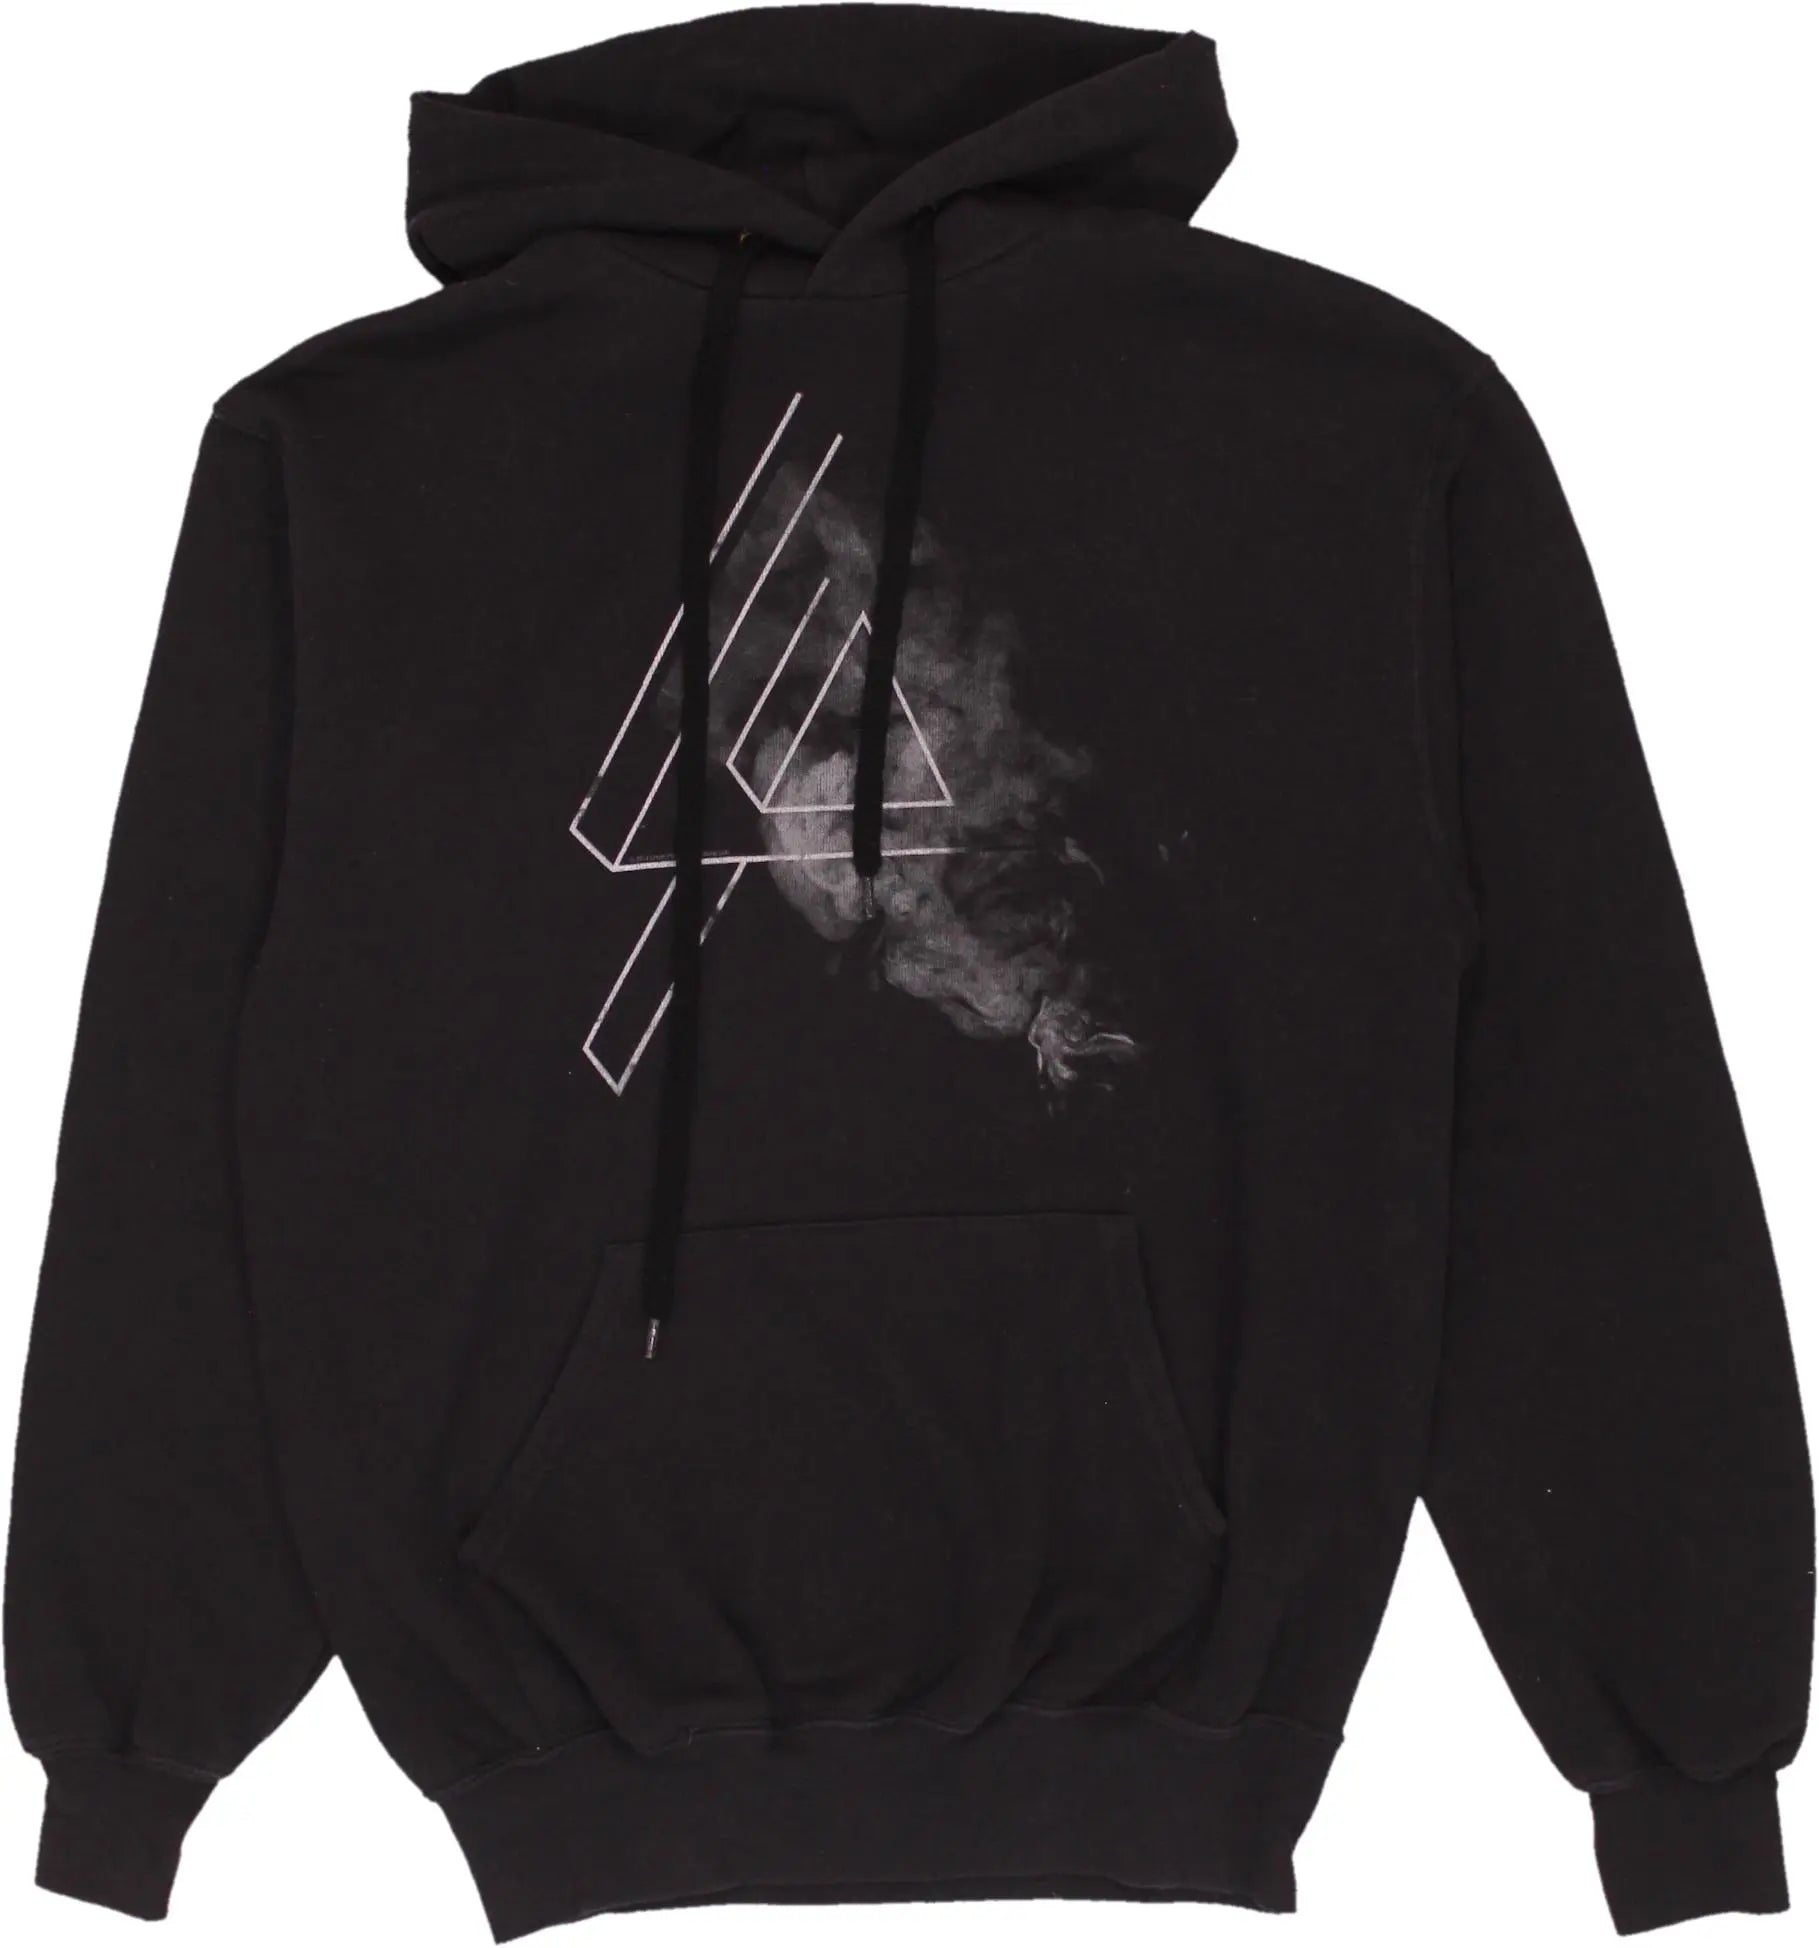 Fruit of the Loom - Linkin Park Hoodie- ThriftTale.com - Vintage and second handclothing